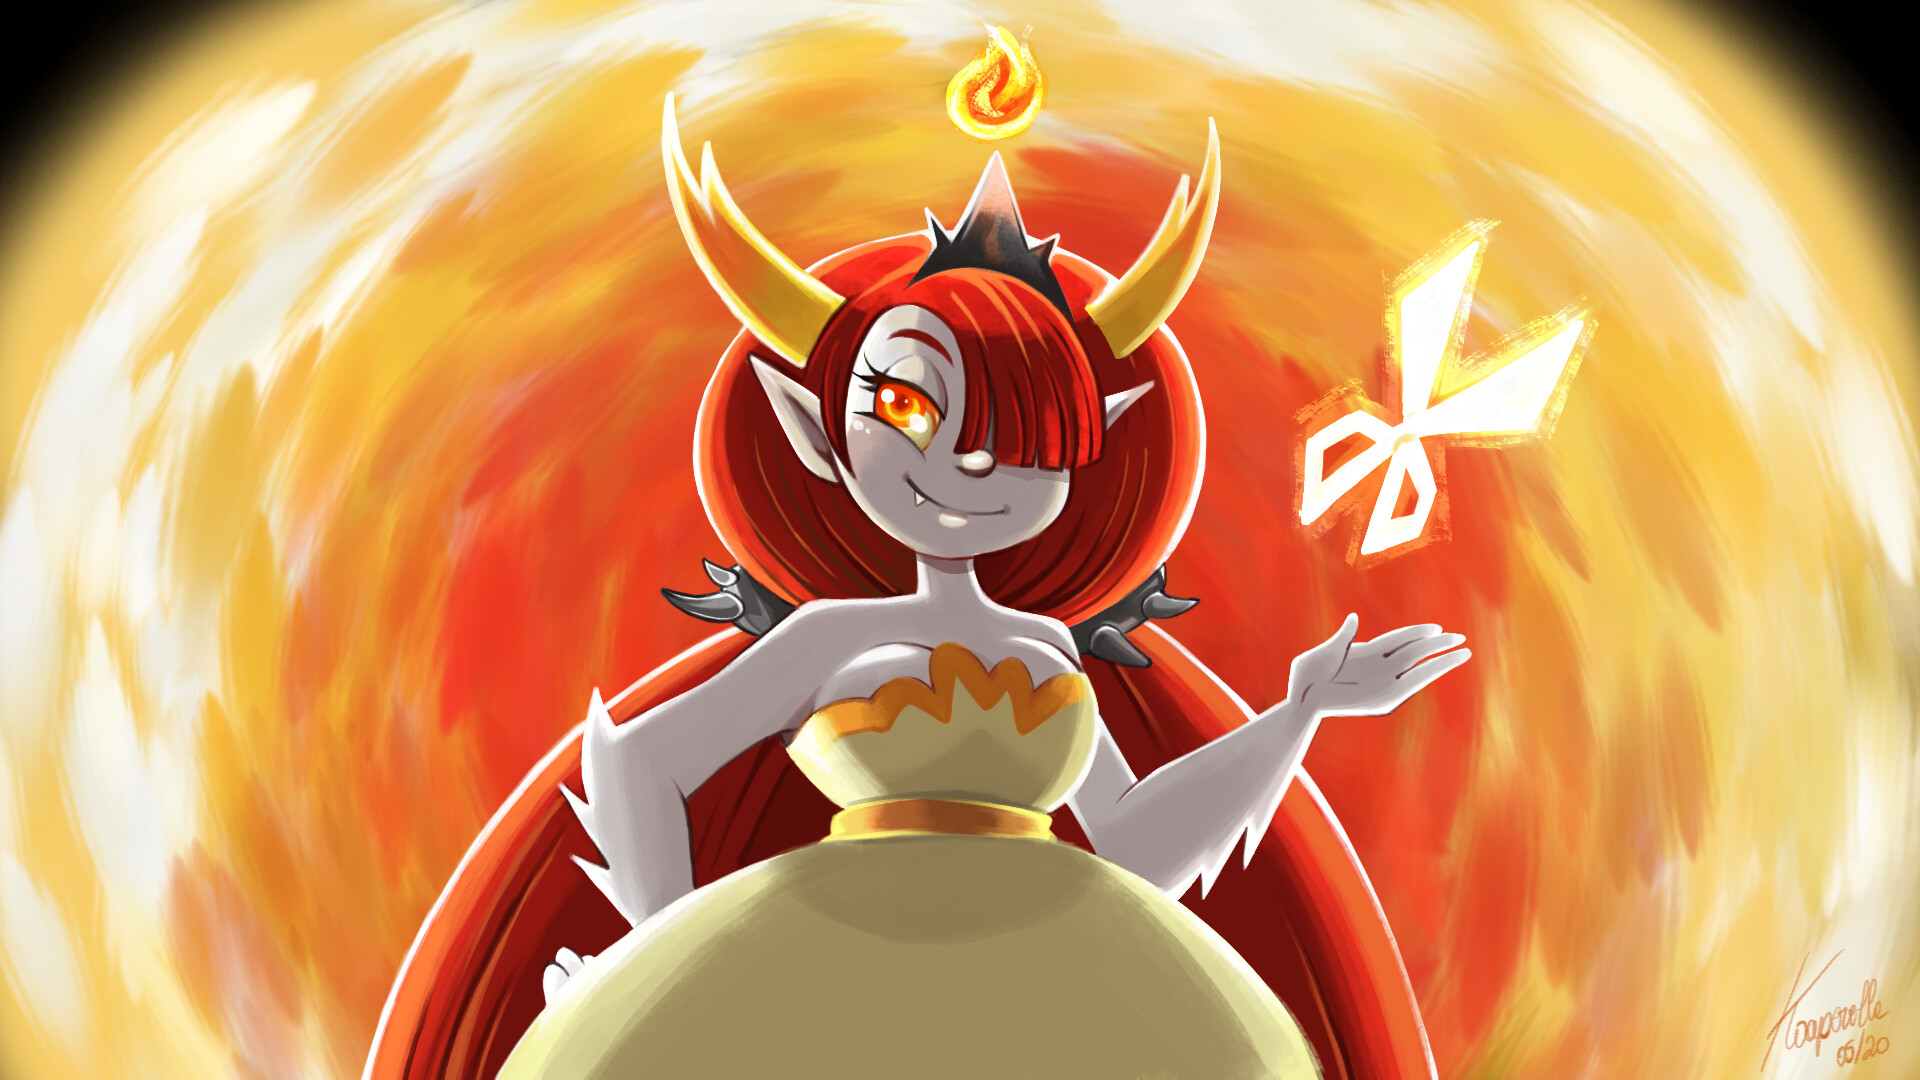 Hekapoo fan art of "marco and star vs the forces of evil"